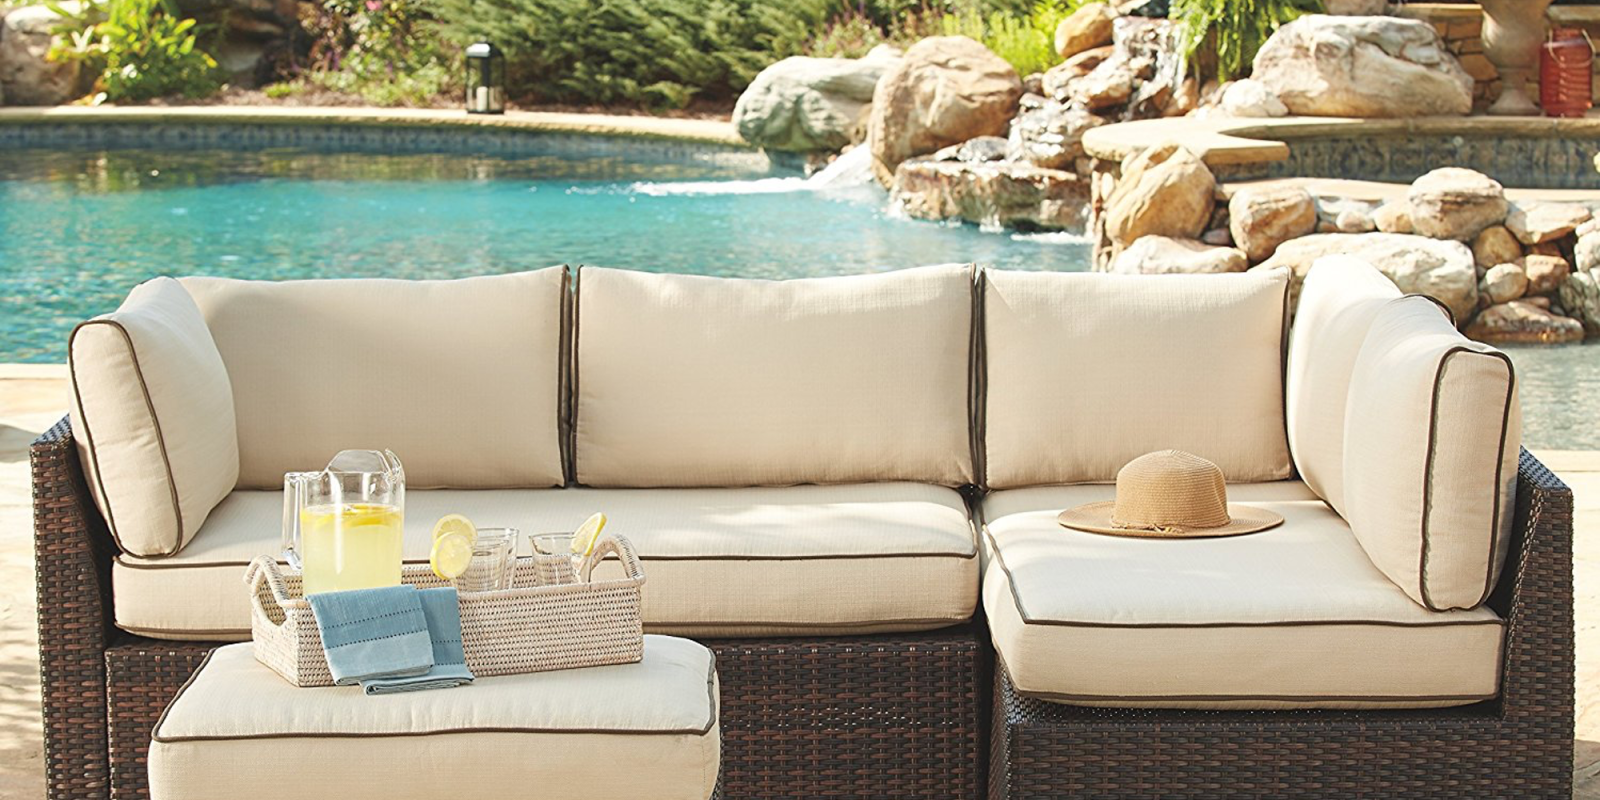 Amazon Discounts Select Ashley Furniture Outdoor Patio Gear From